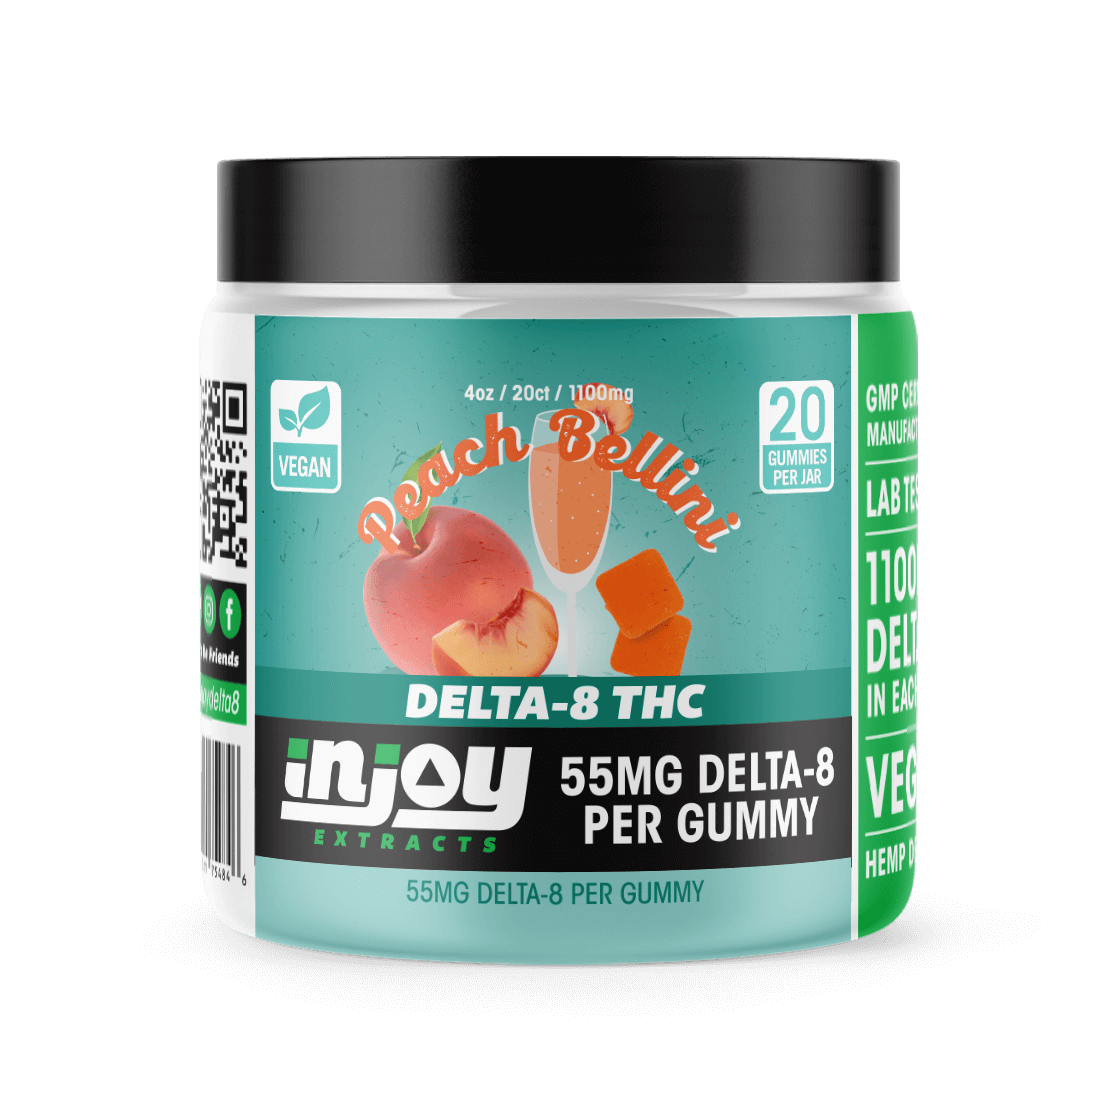 50mg Delta 8 Gummies - Peach Flavored - Injoy Extracts